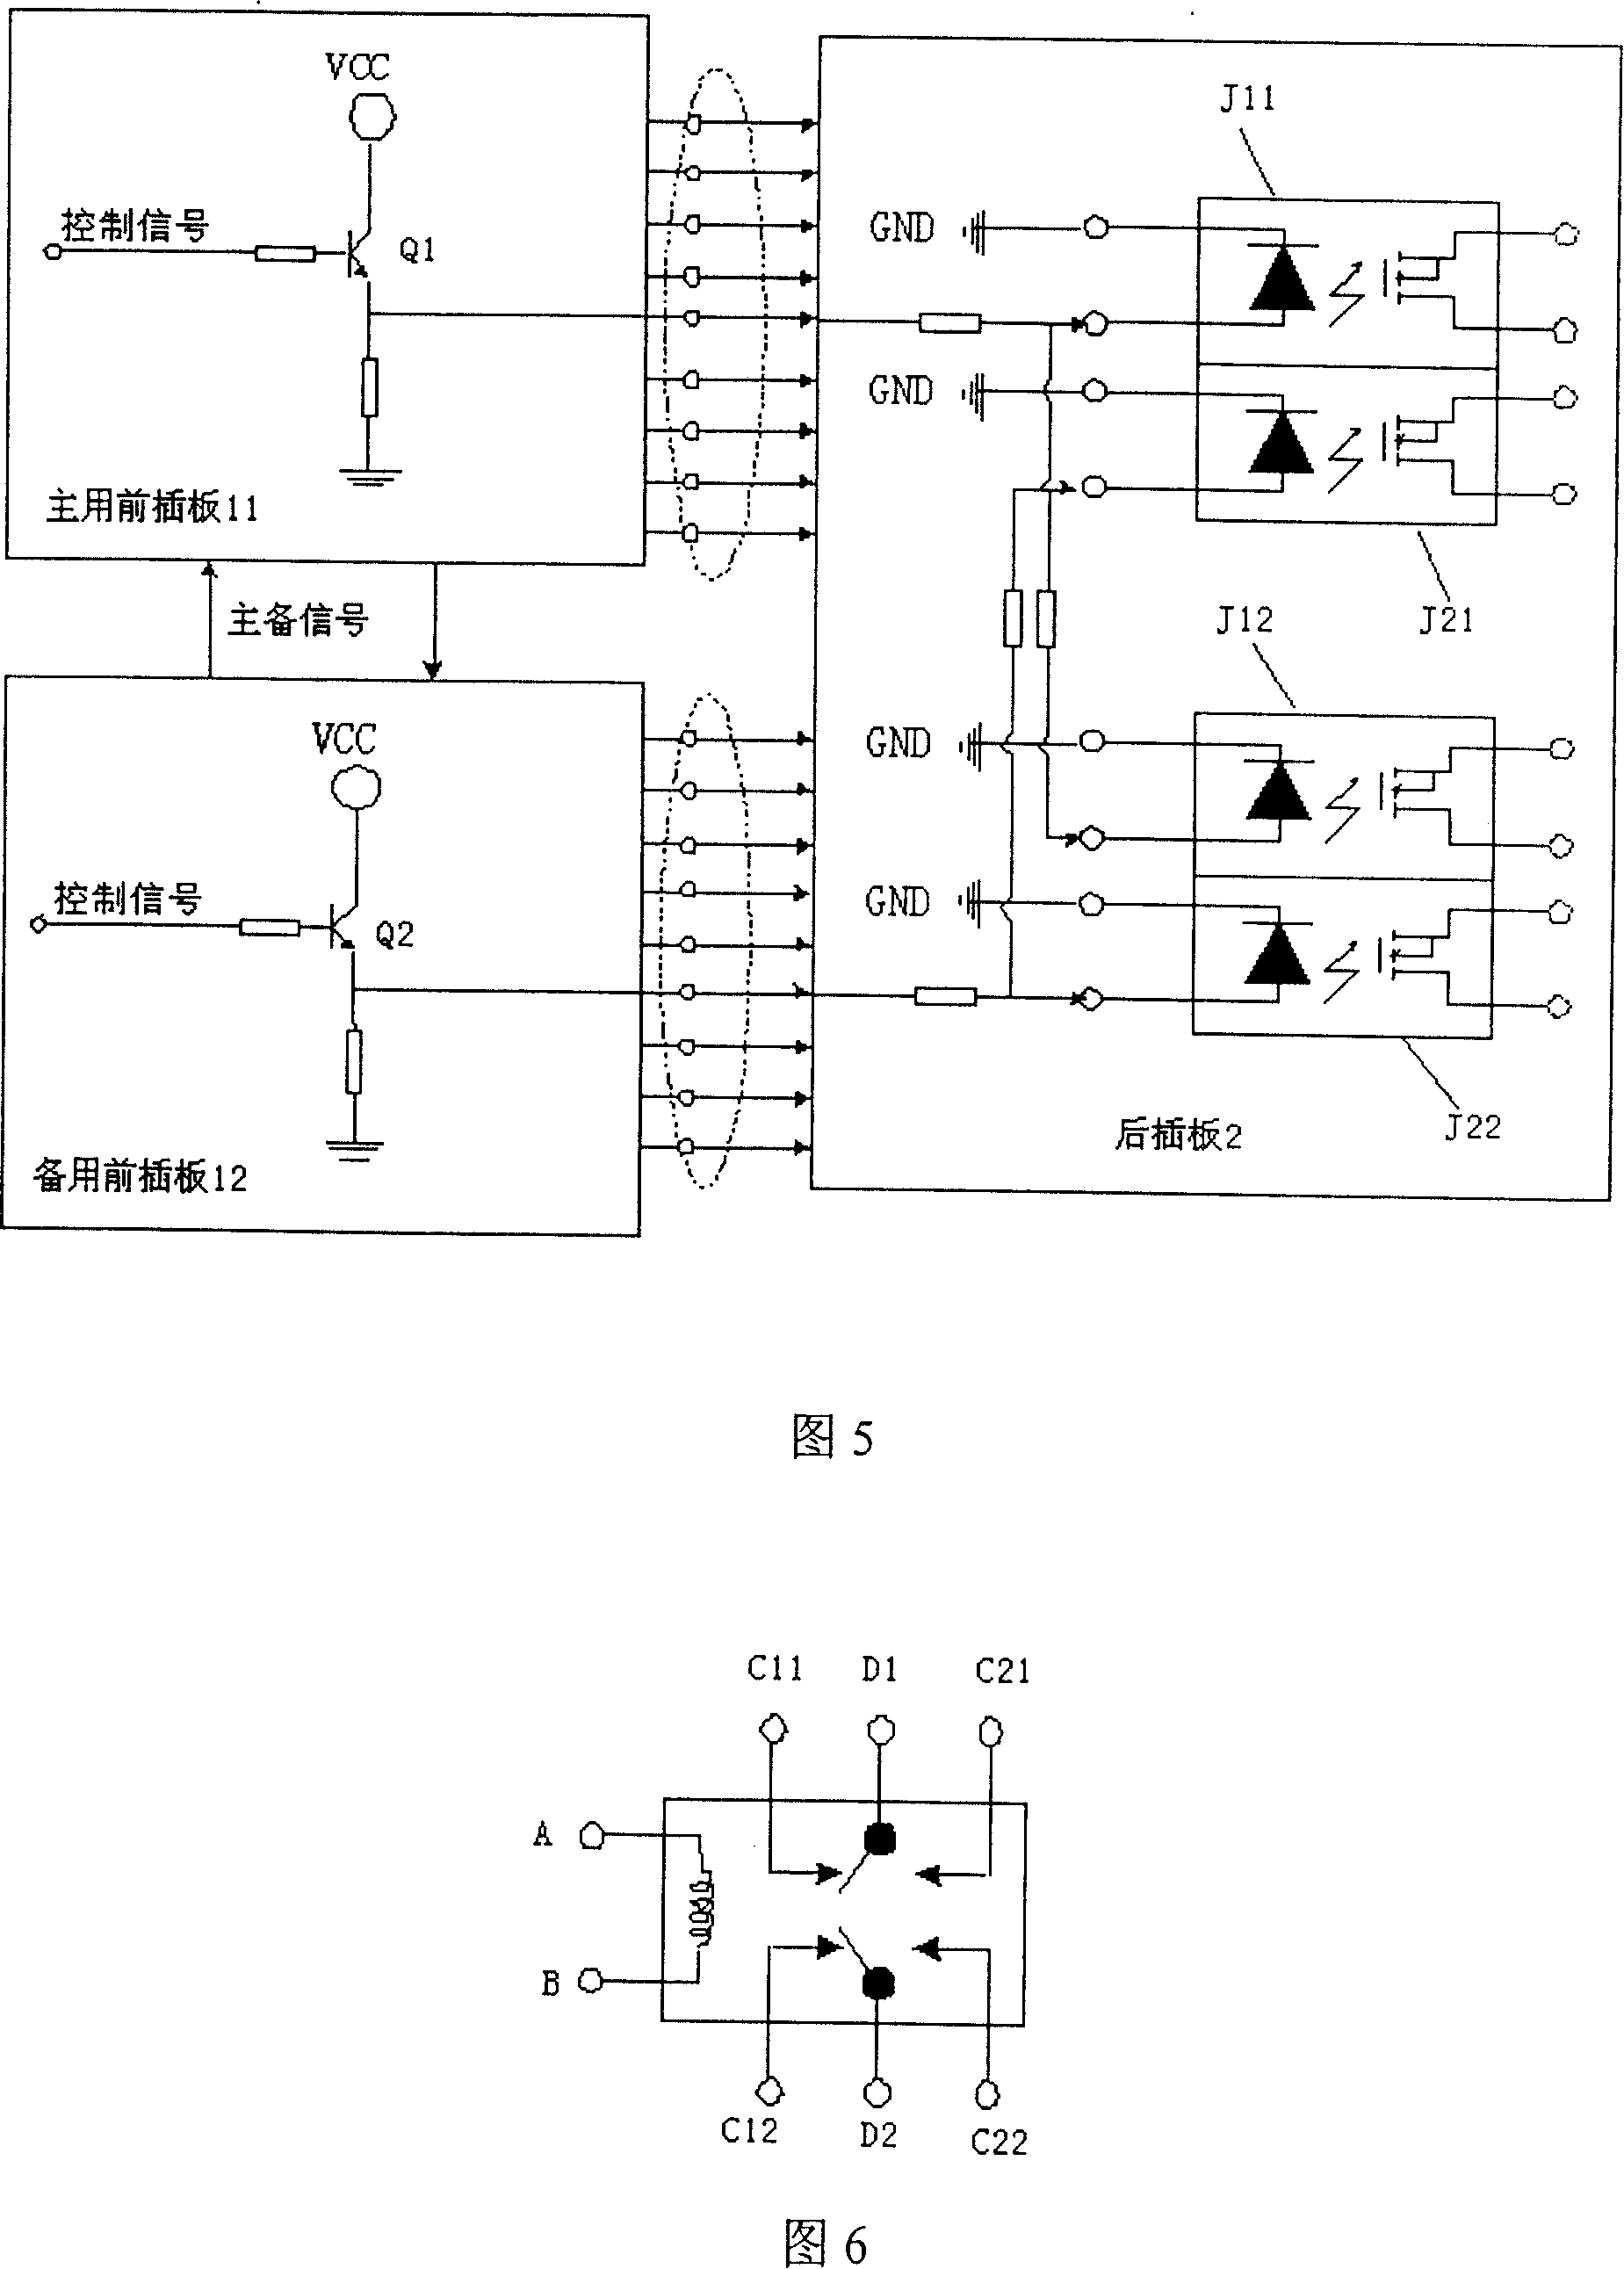 E1/T1 interface for implementing backup through using relay